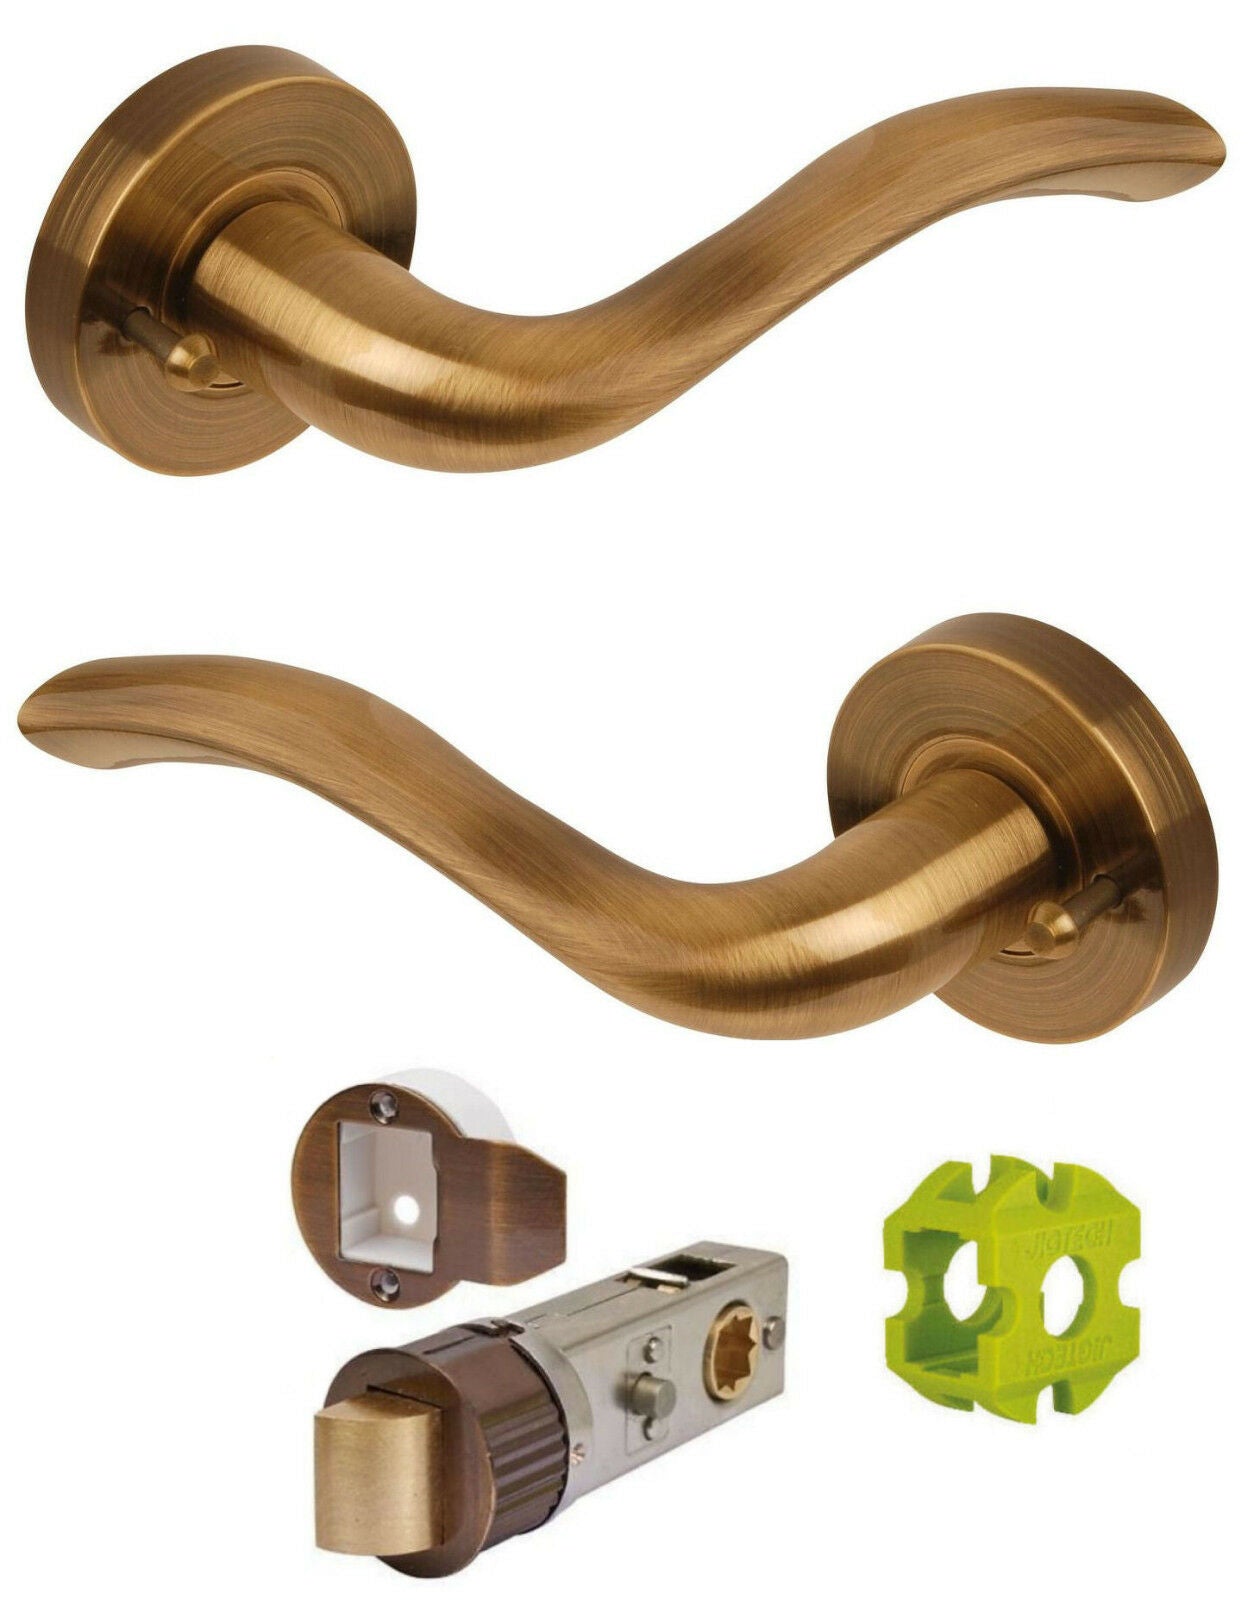 JIGTECH Quick Fit System SOLAR Lever on Rose Door Handles Fit in under 5 Minutes